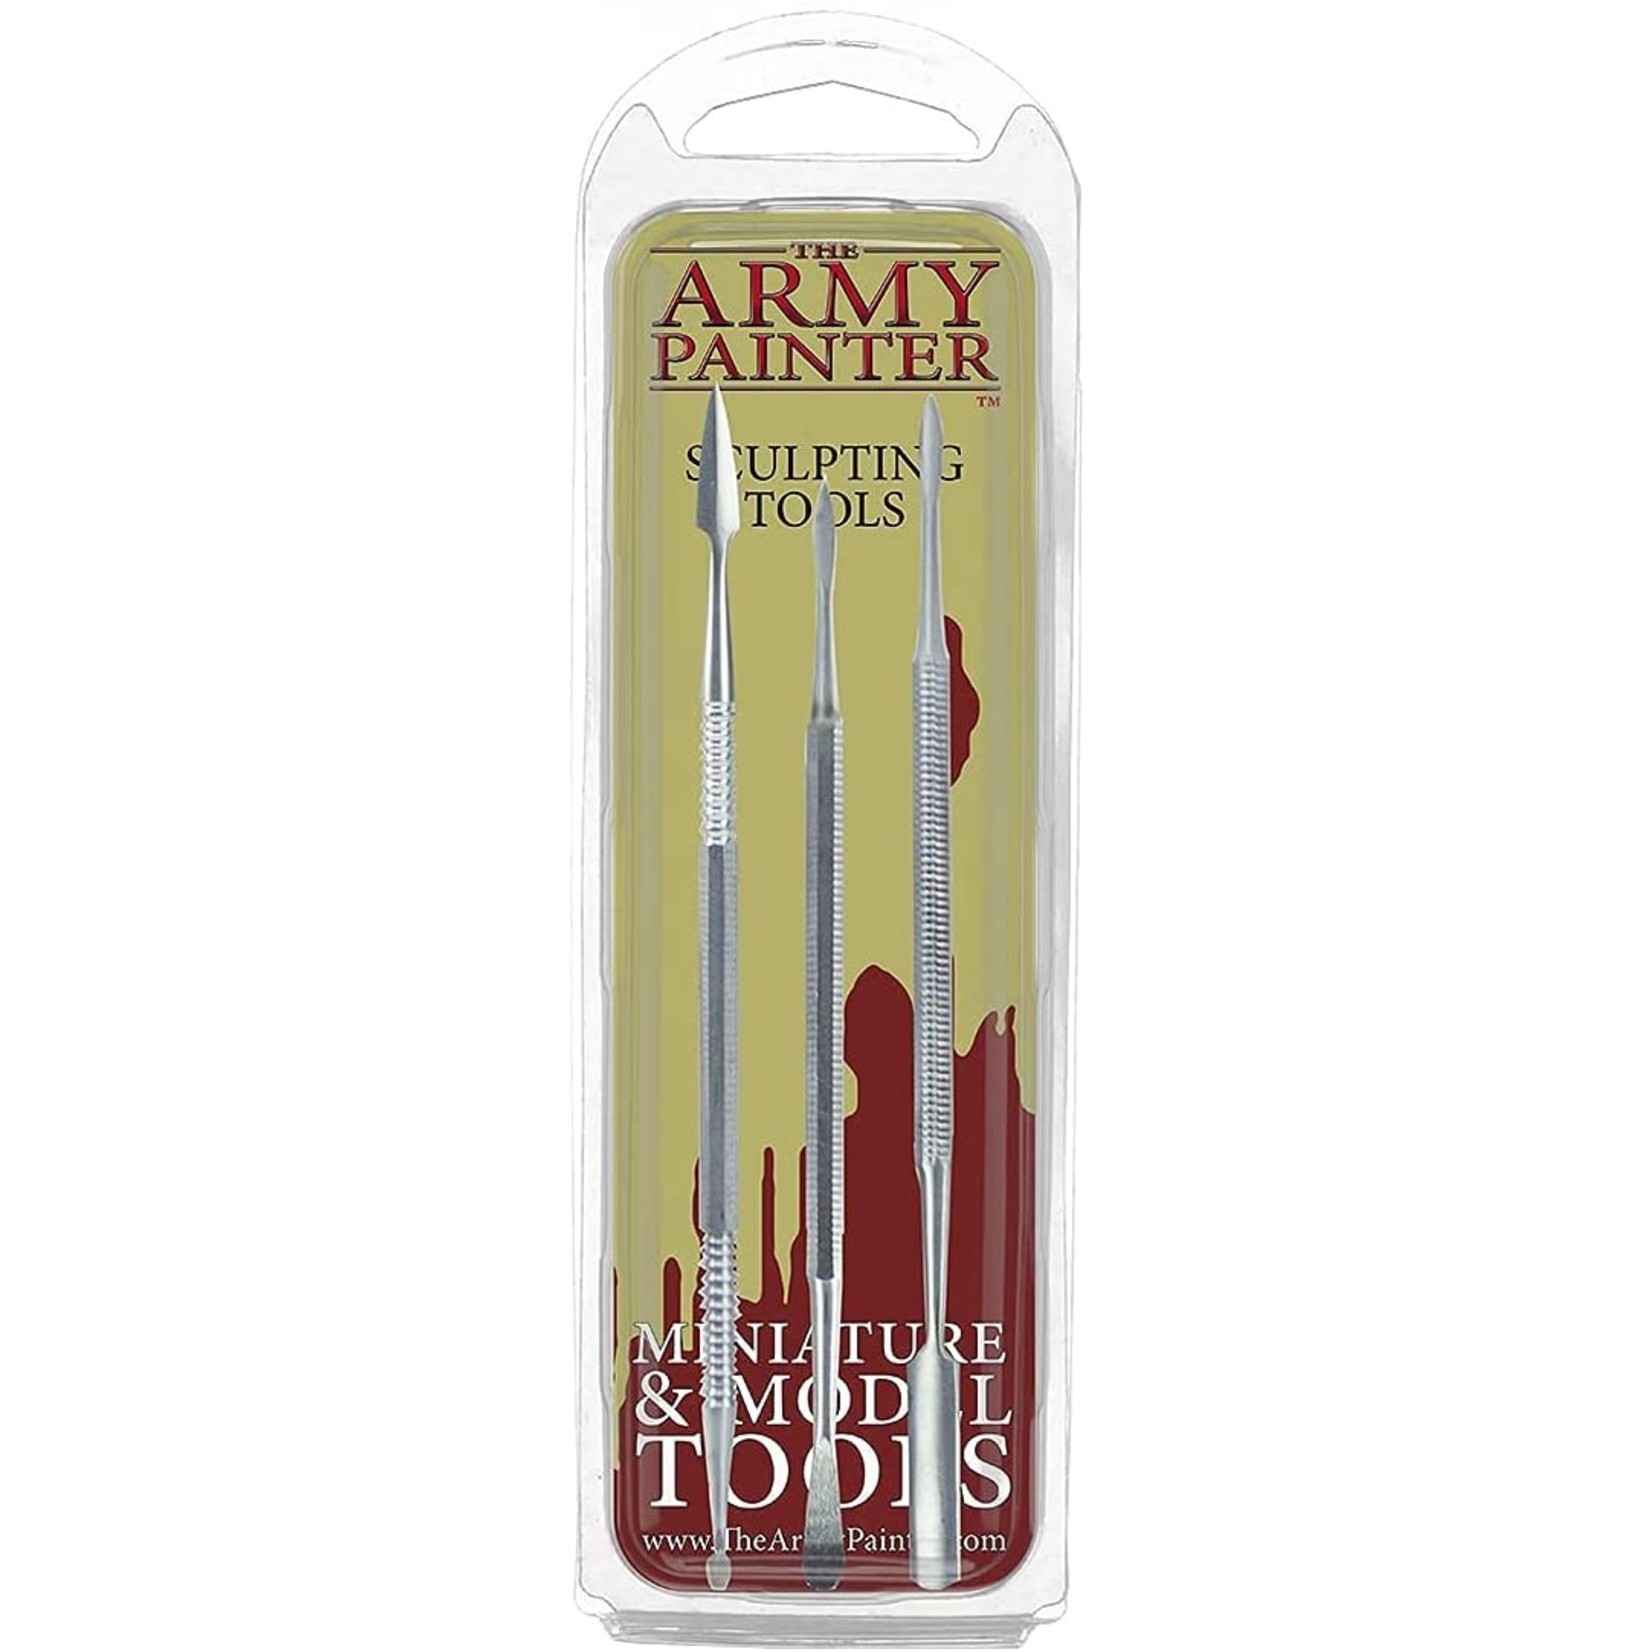 Army Painter Tool: Hobby Sculpting Tools